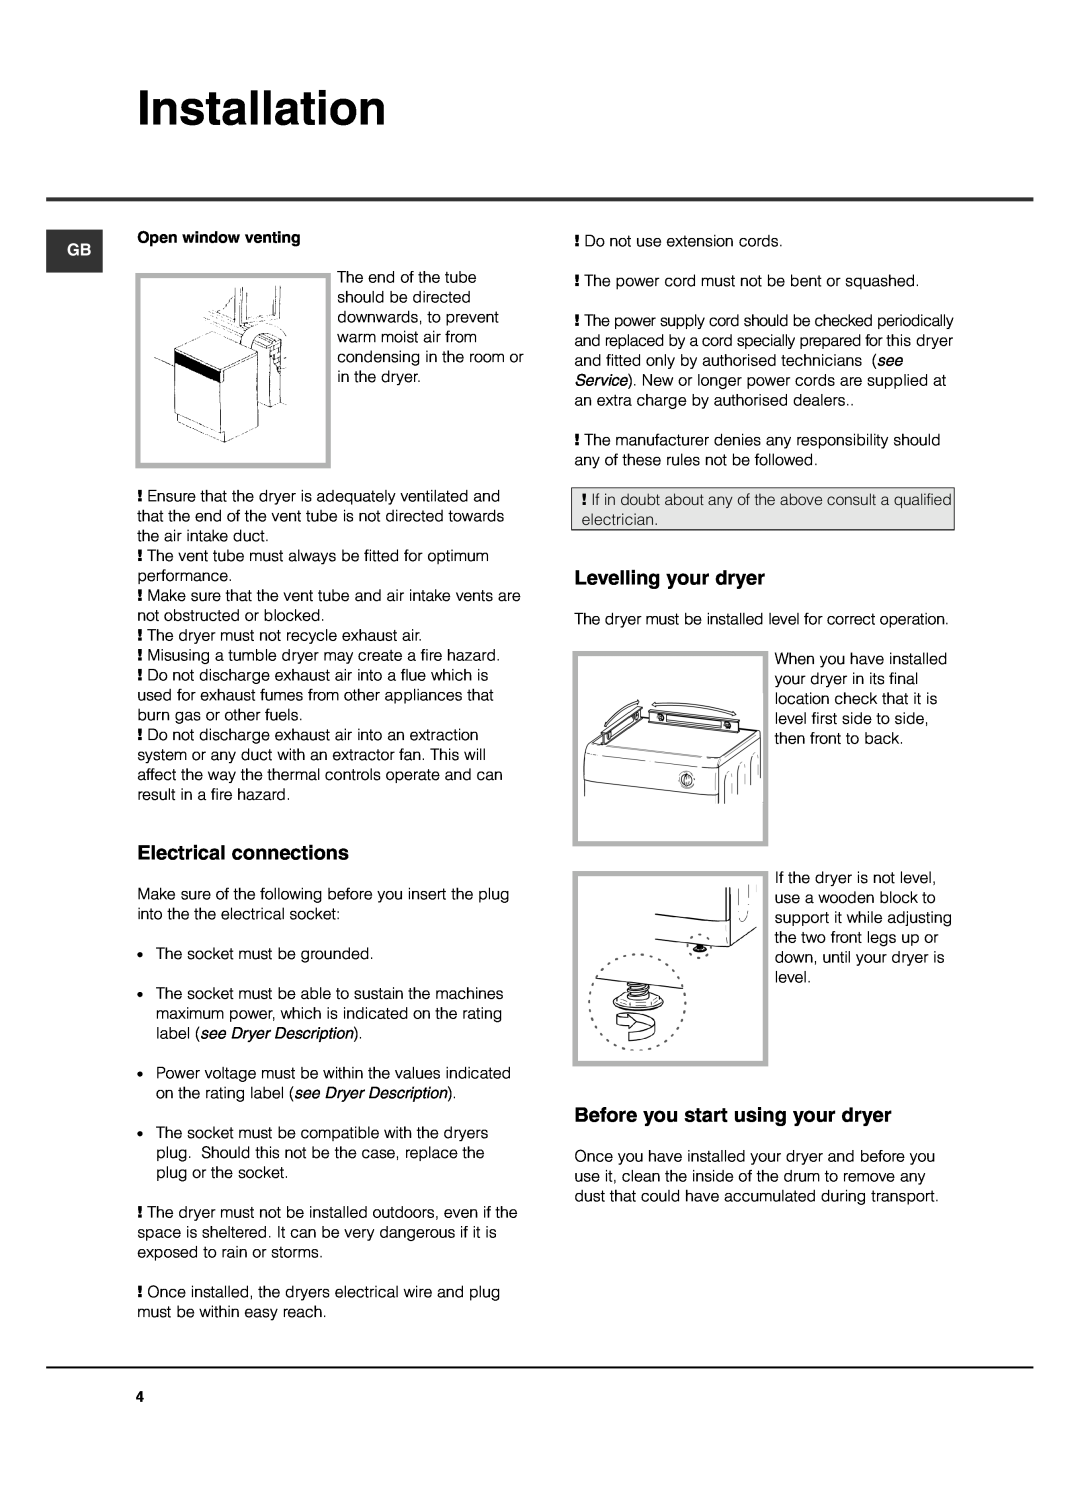 Hotpoint TVF770 manual Electrical connections, Levelling your dryer, Before you start using your dryer, Installation 